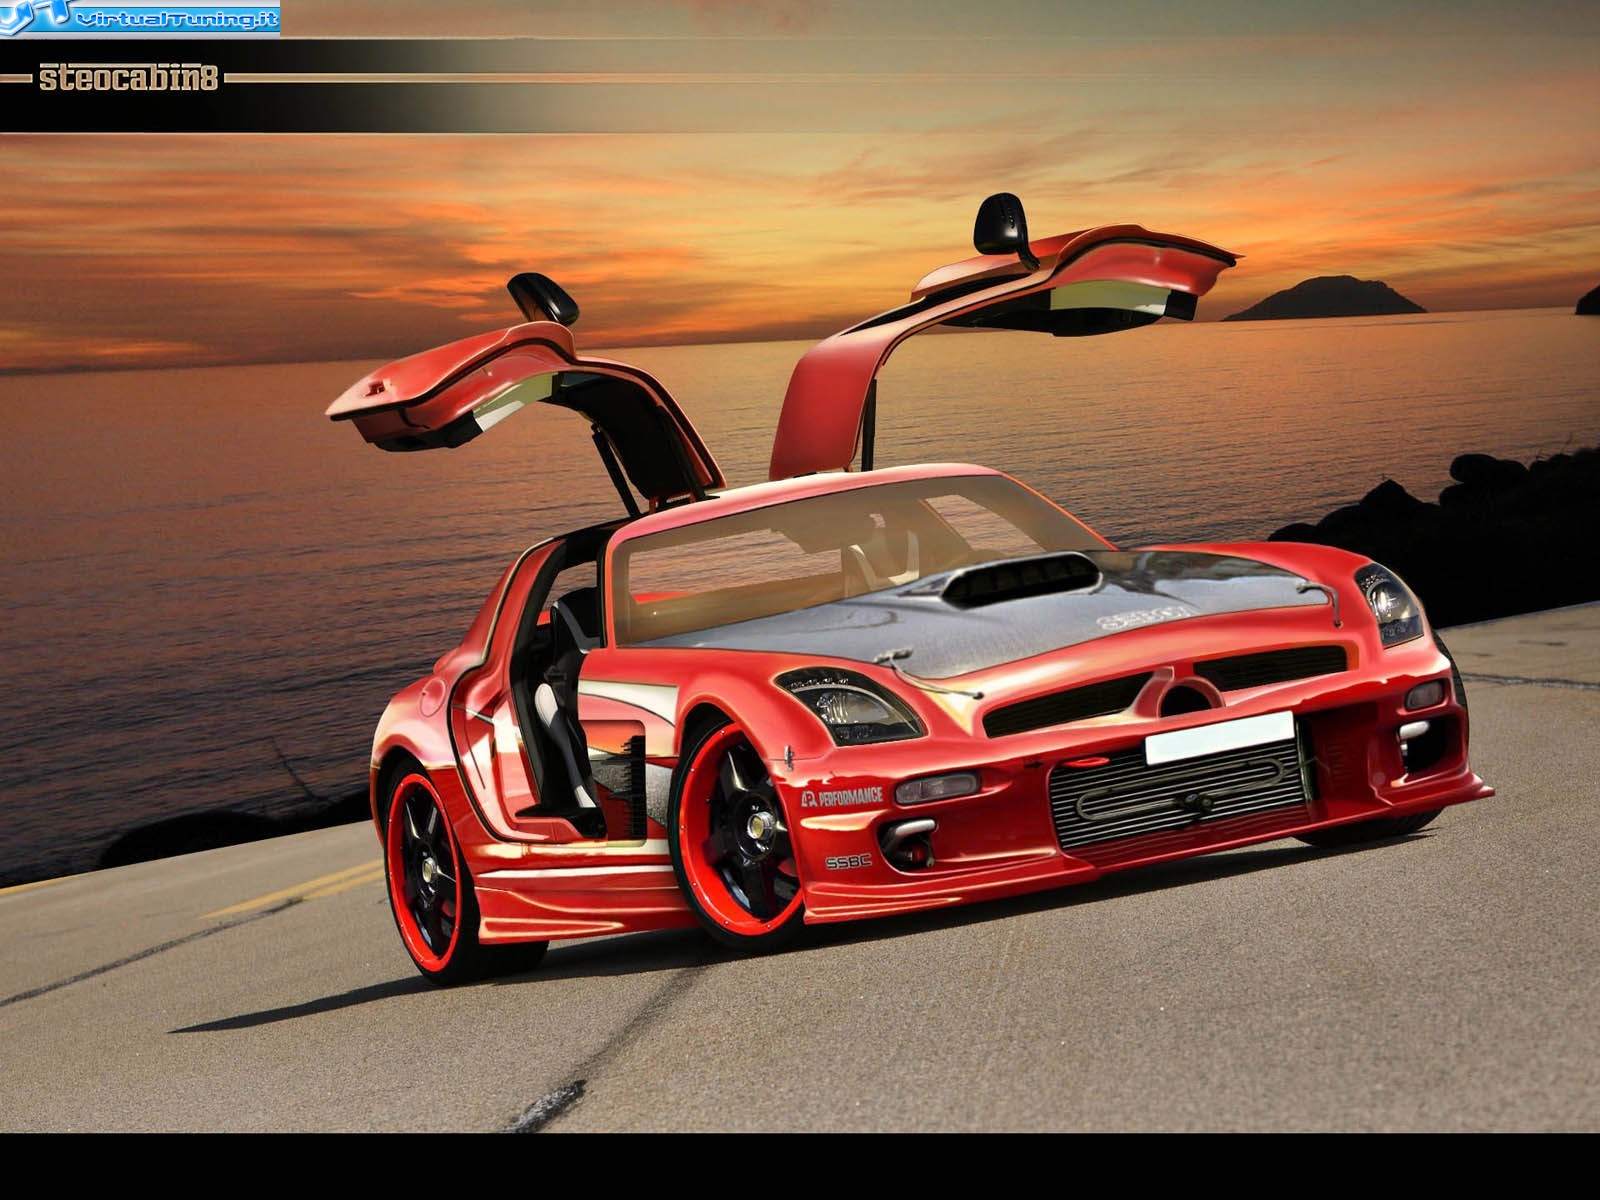 VirtualTuning MERCEDES SLS AMG E-Cell by steocabin8